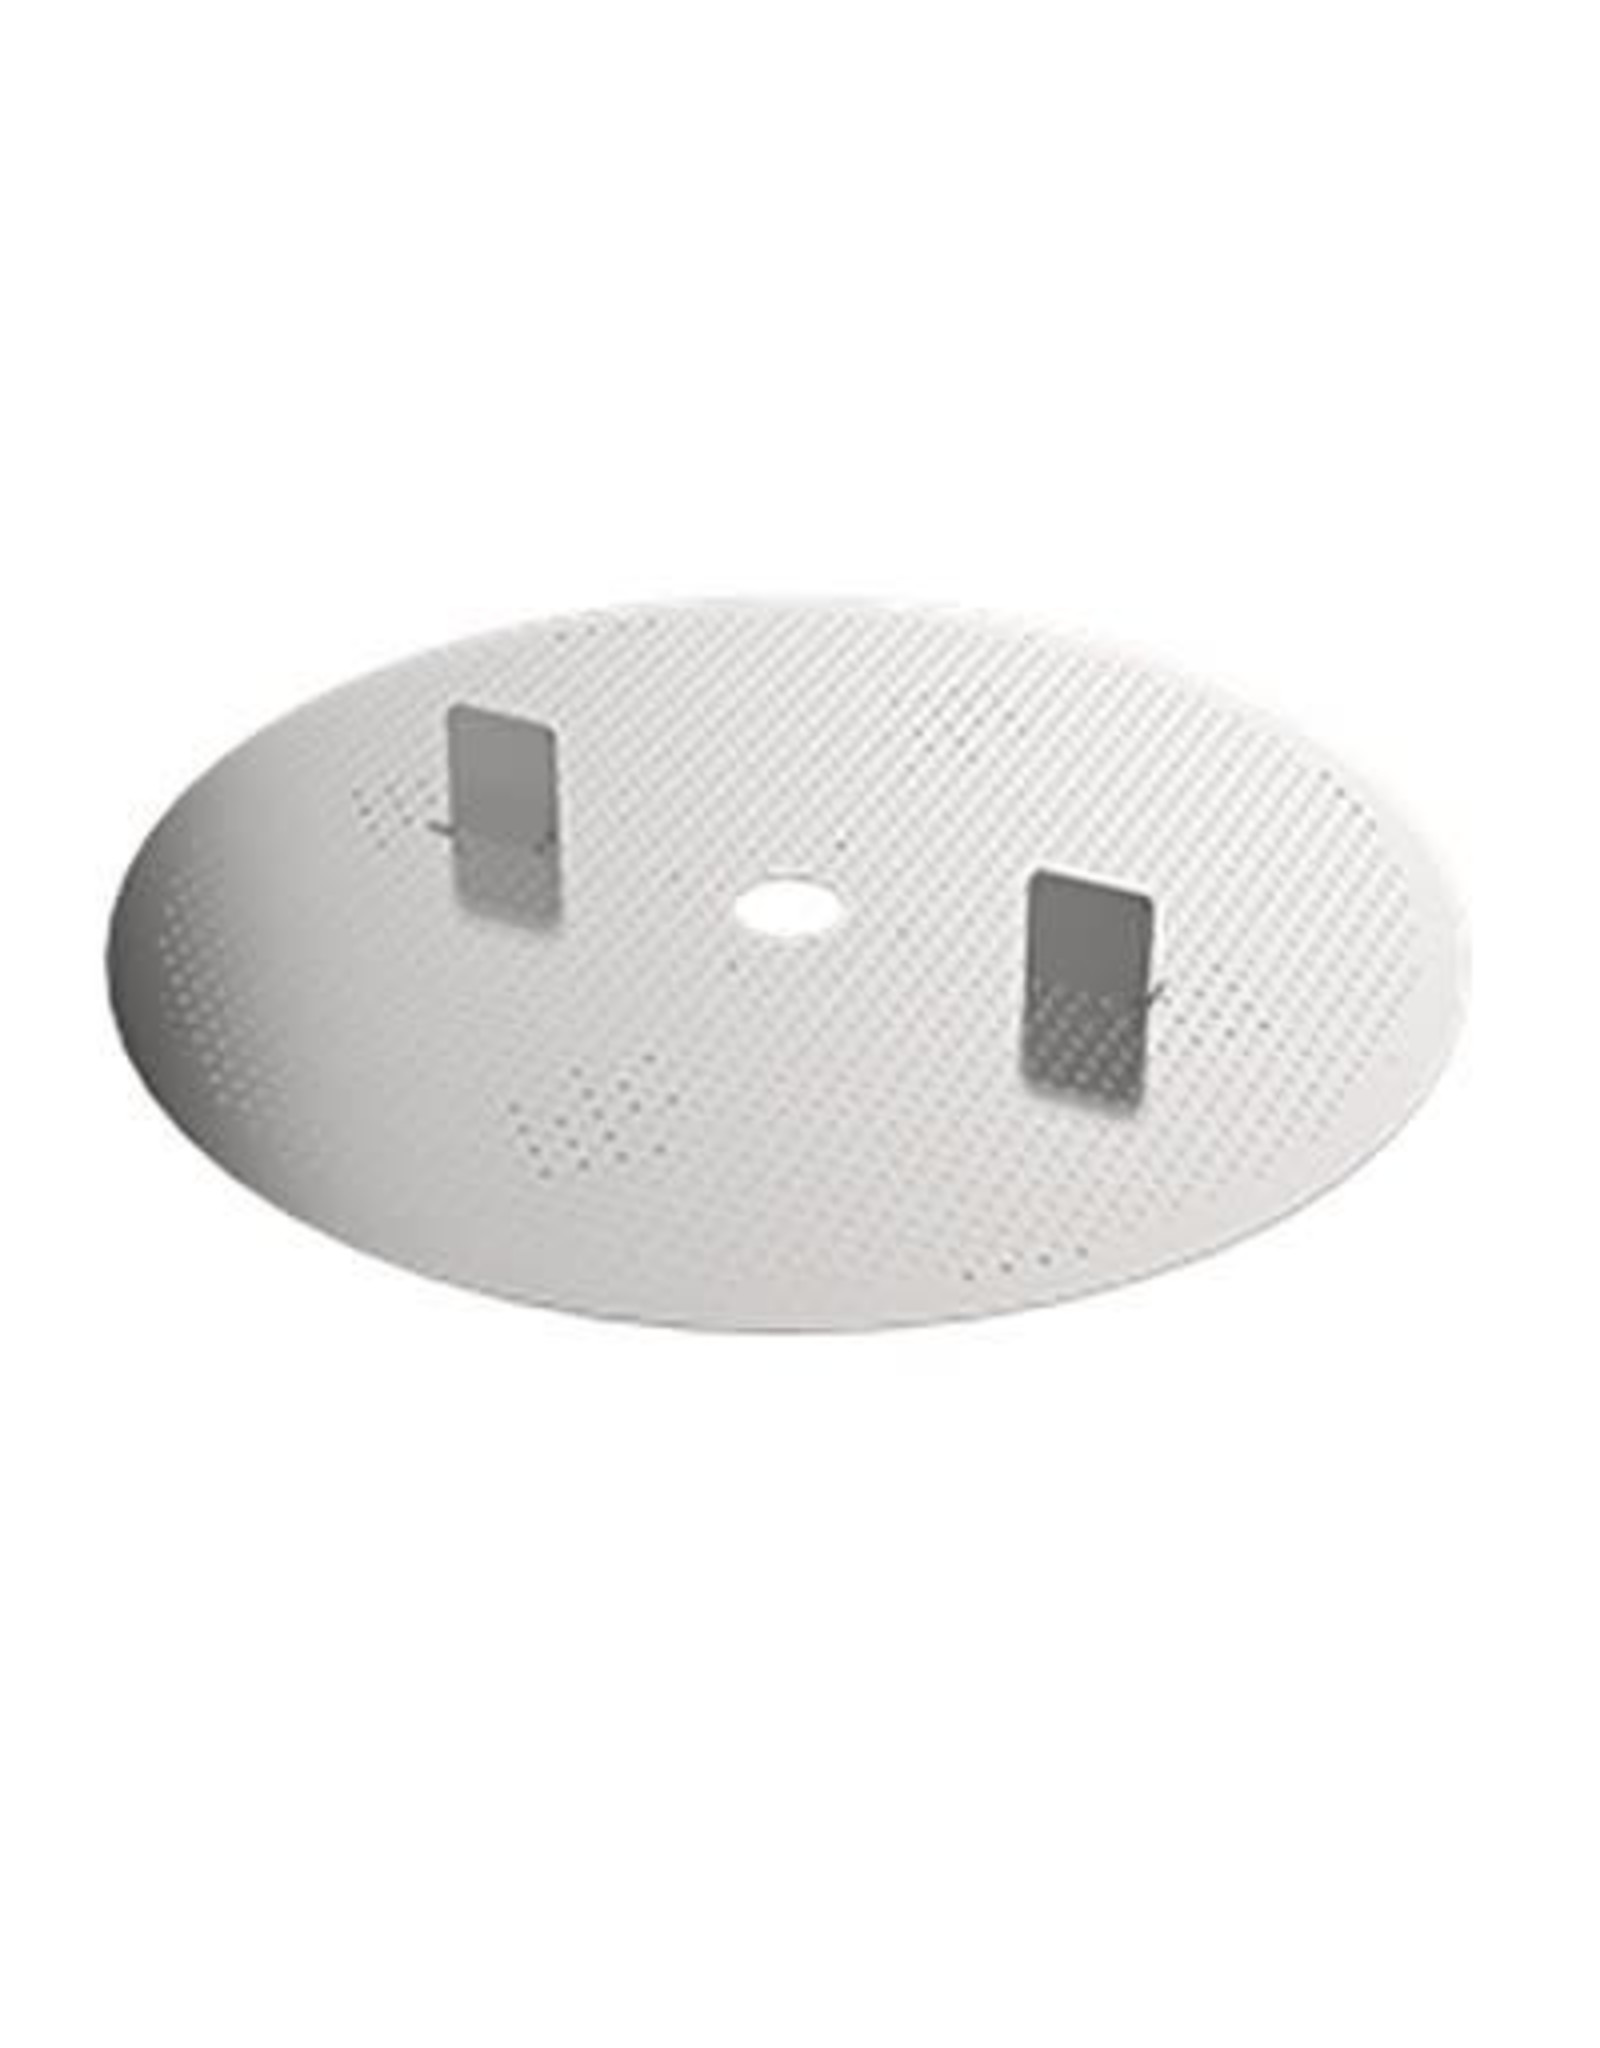 UPPER PERFORATED FILTER